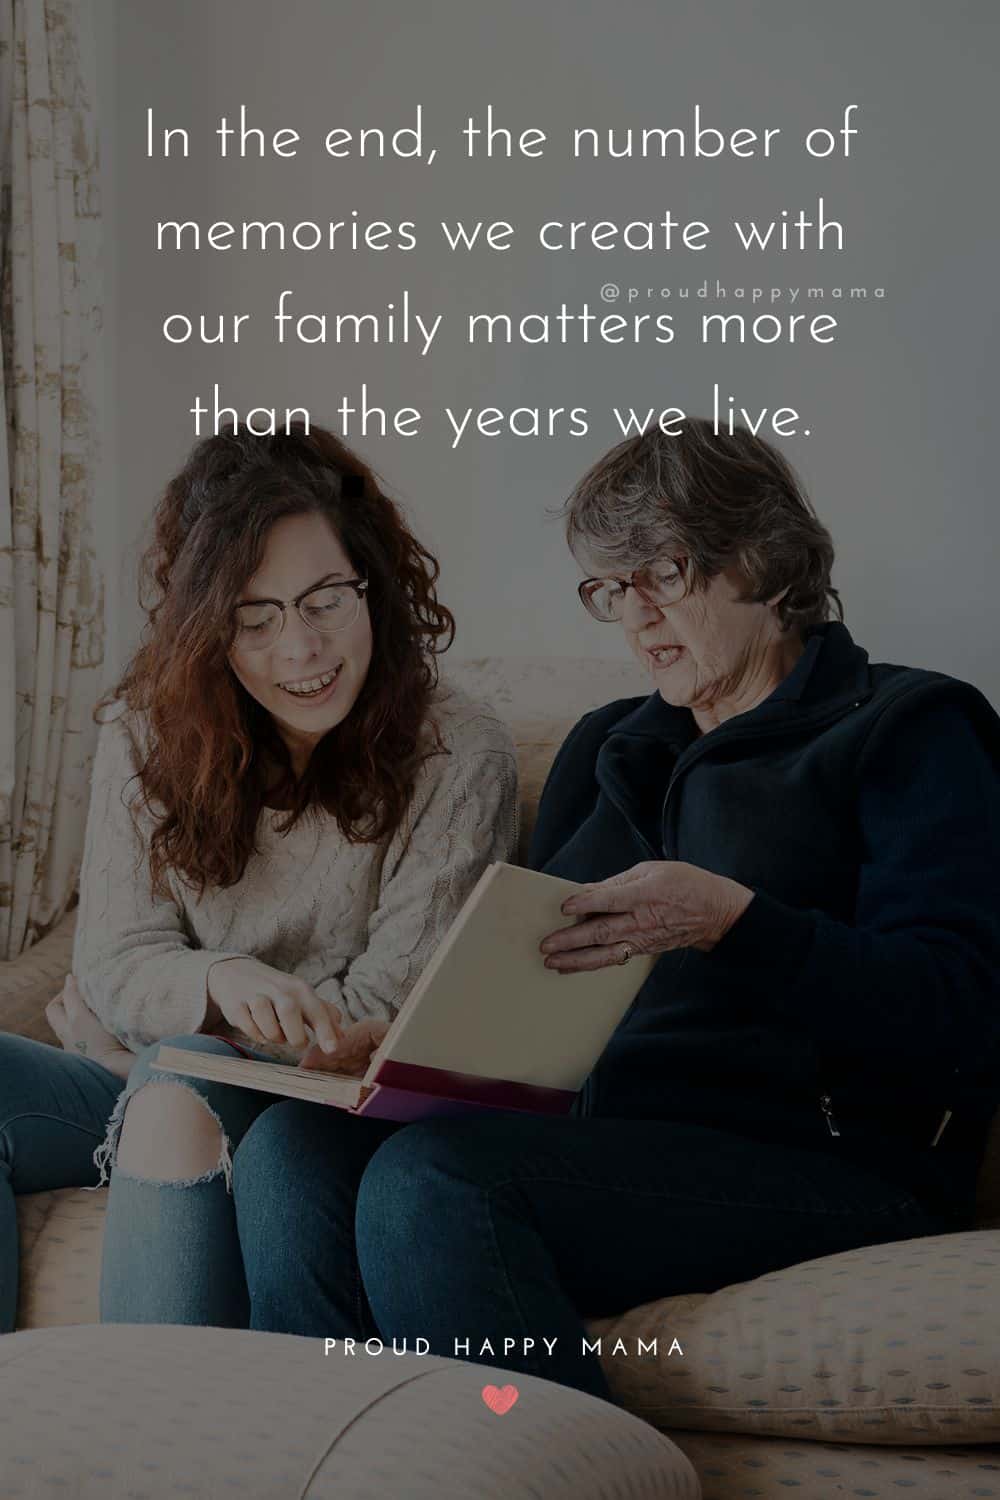 time with family quotes - in the end the number of memories we create with our family matters more than the years we live